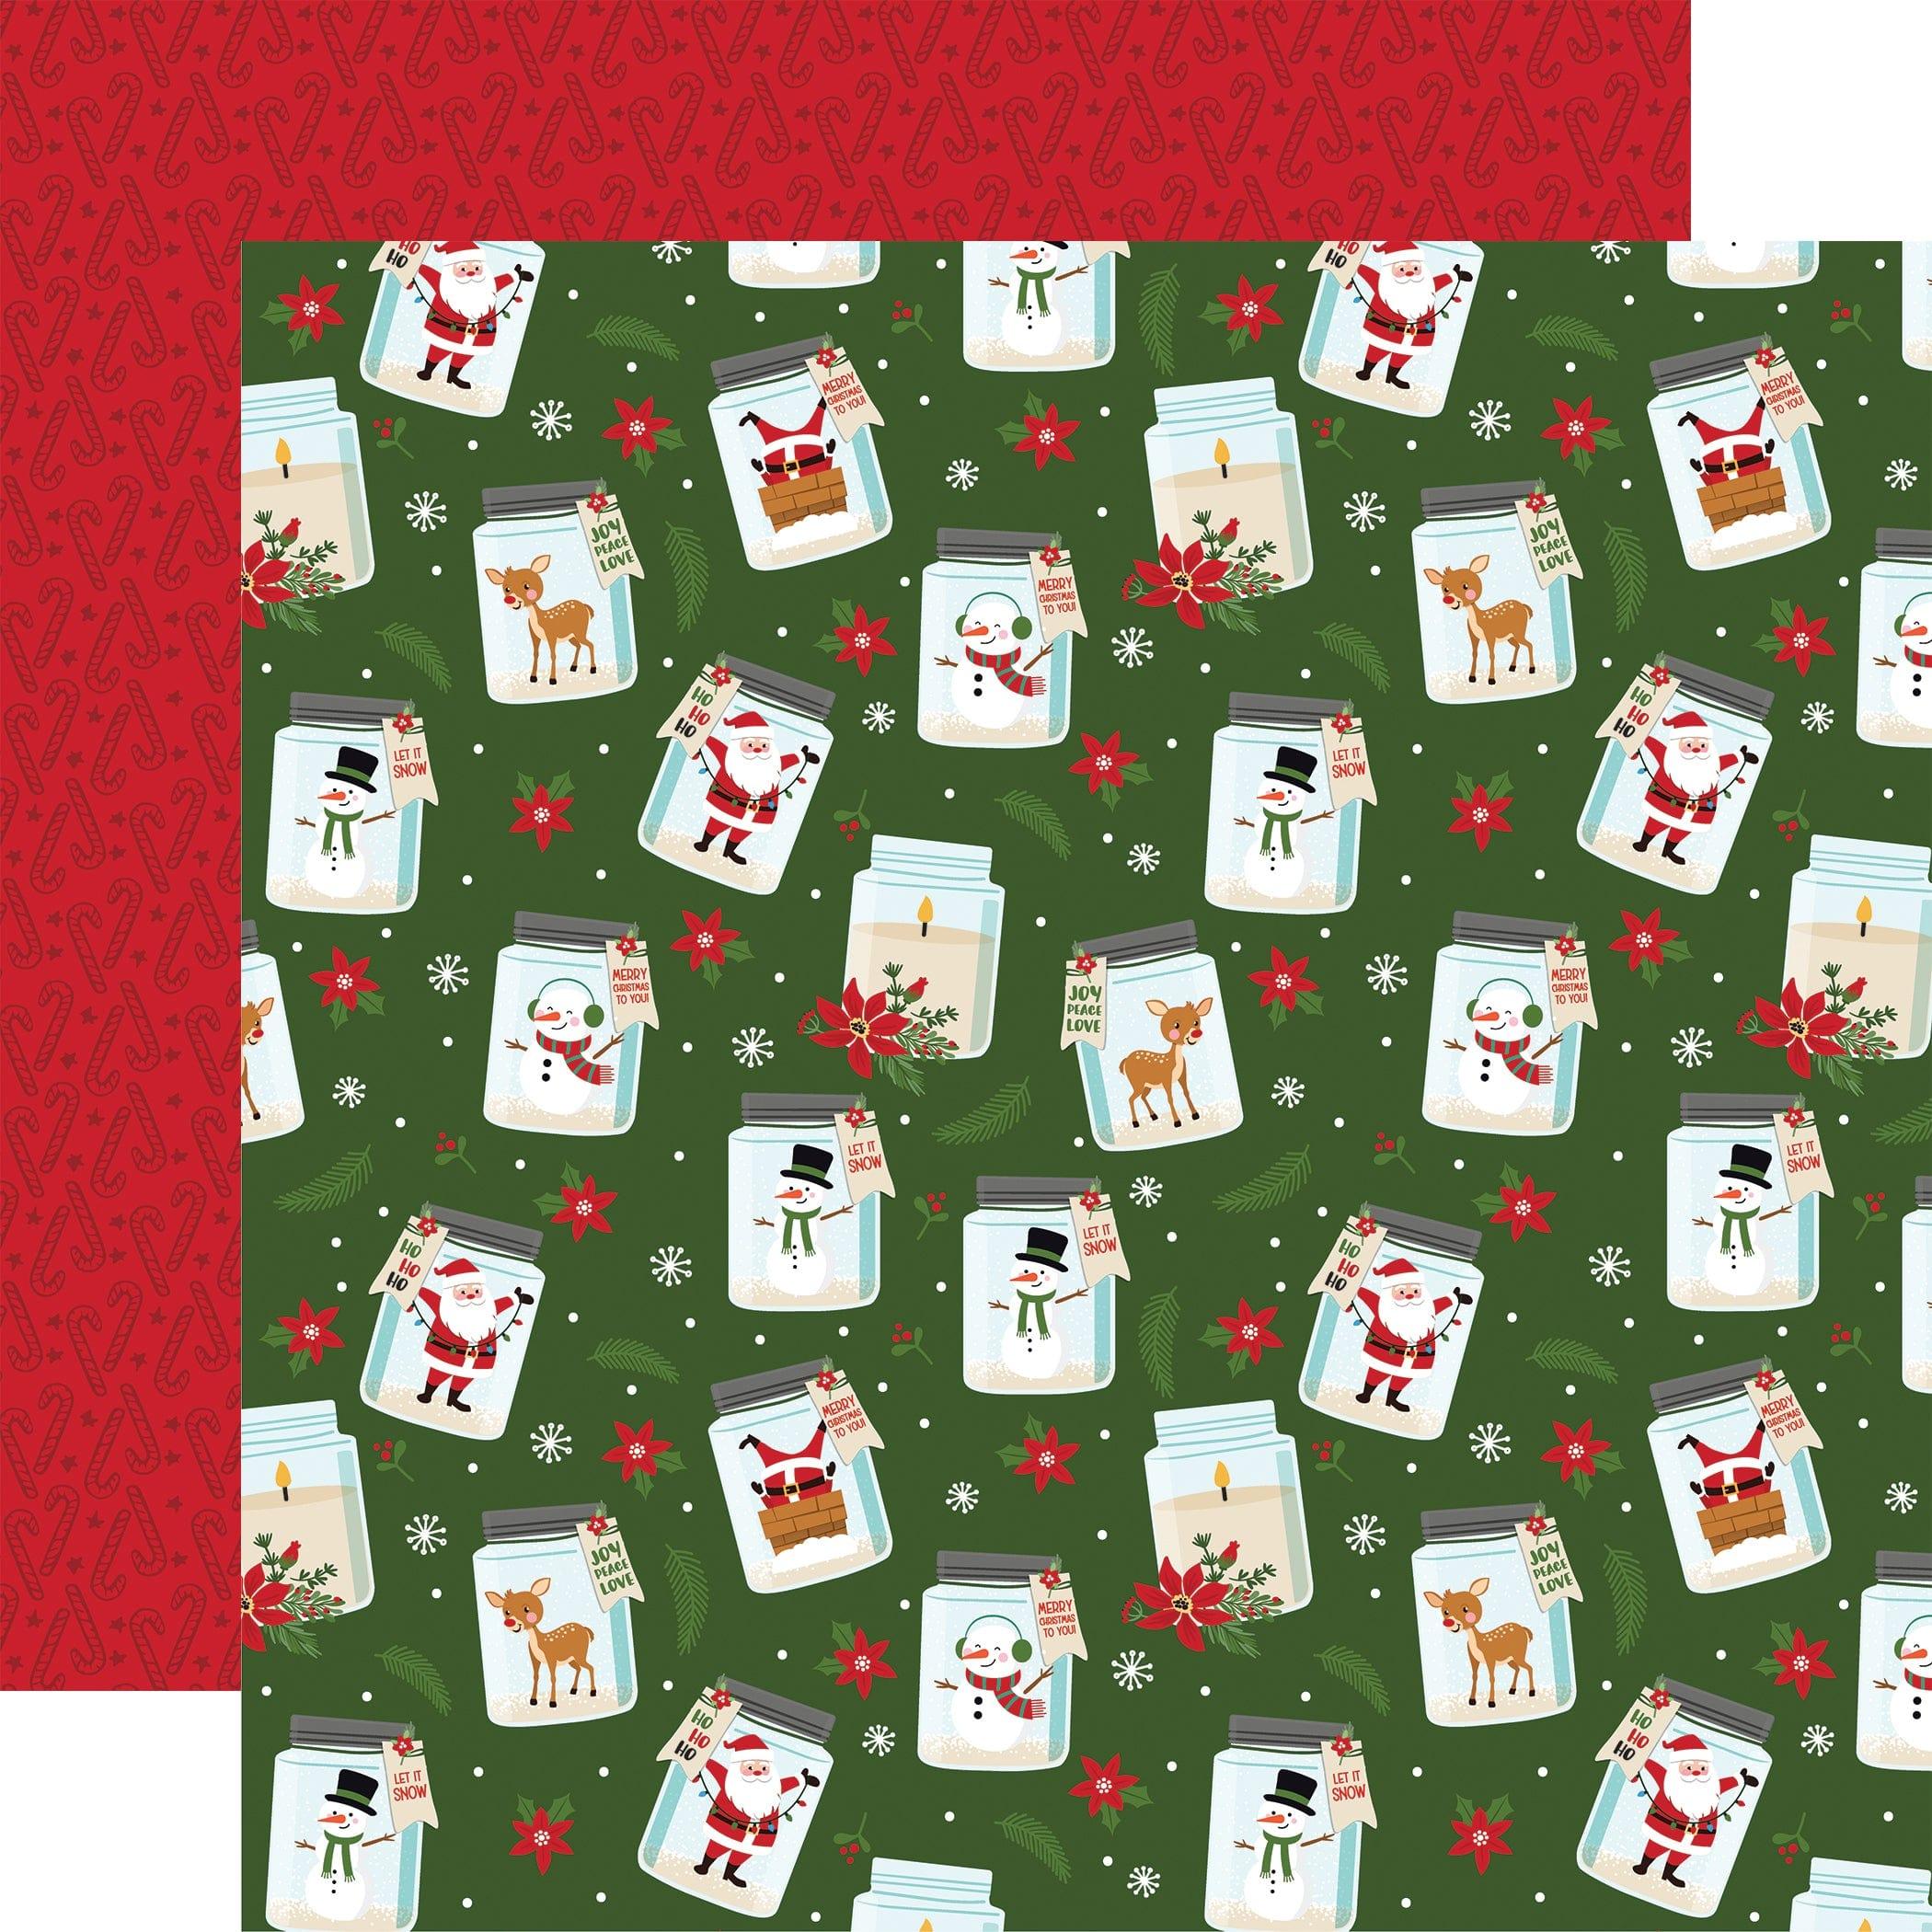 The Magic of Christmas Collection Jolly Jars 12 x 12 Double-Sided Scrapbook Paper by Echo Park Paper - Scrapbook Supply Companies